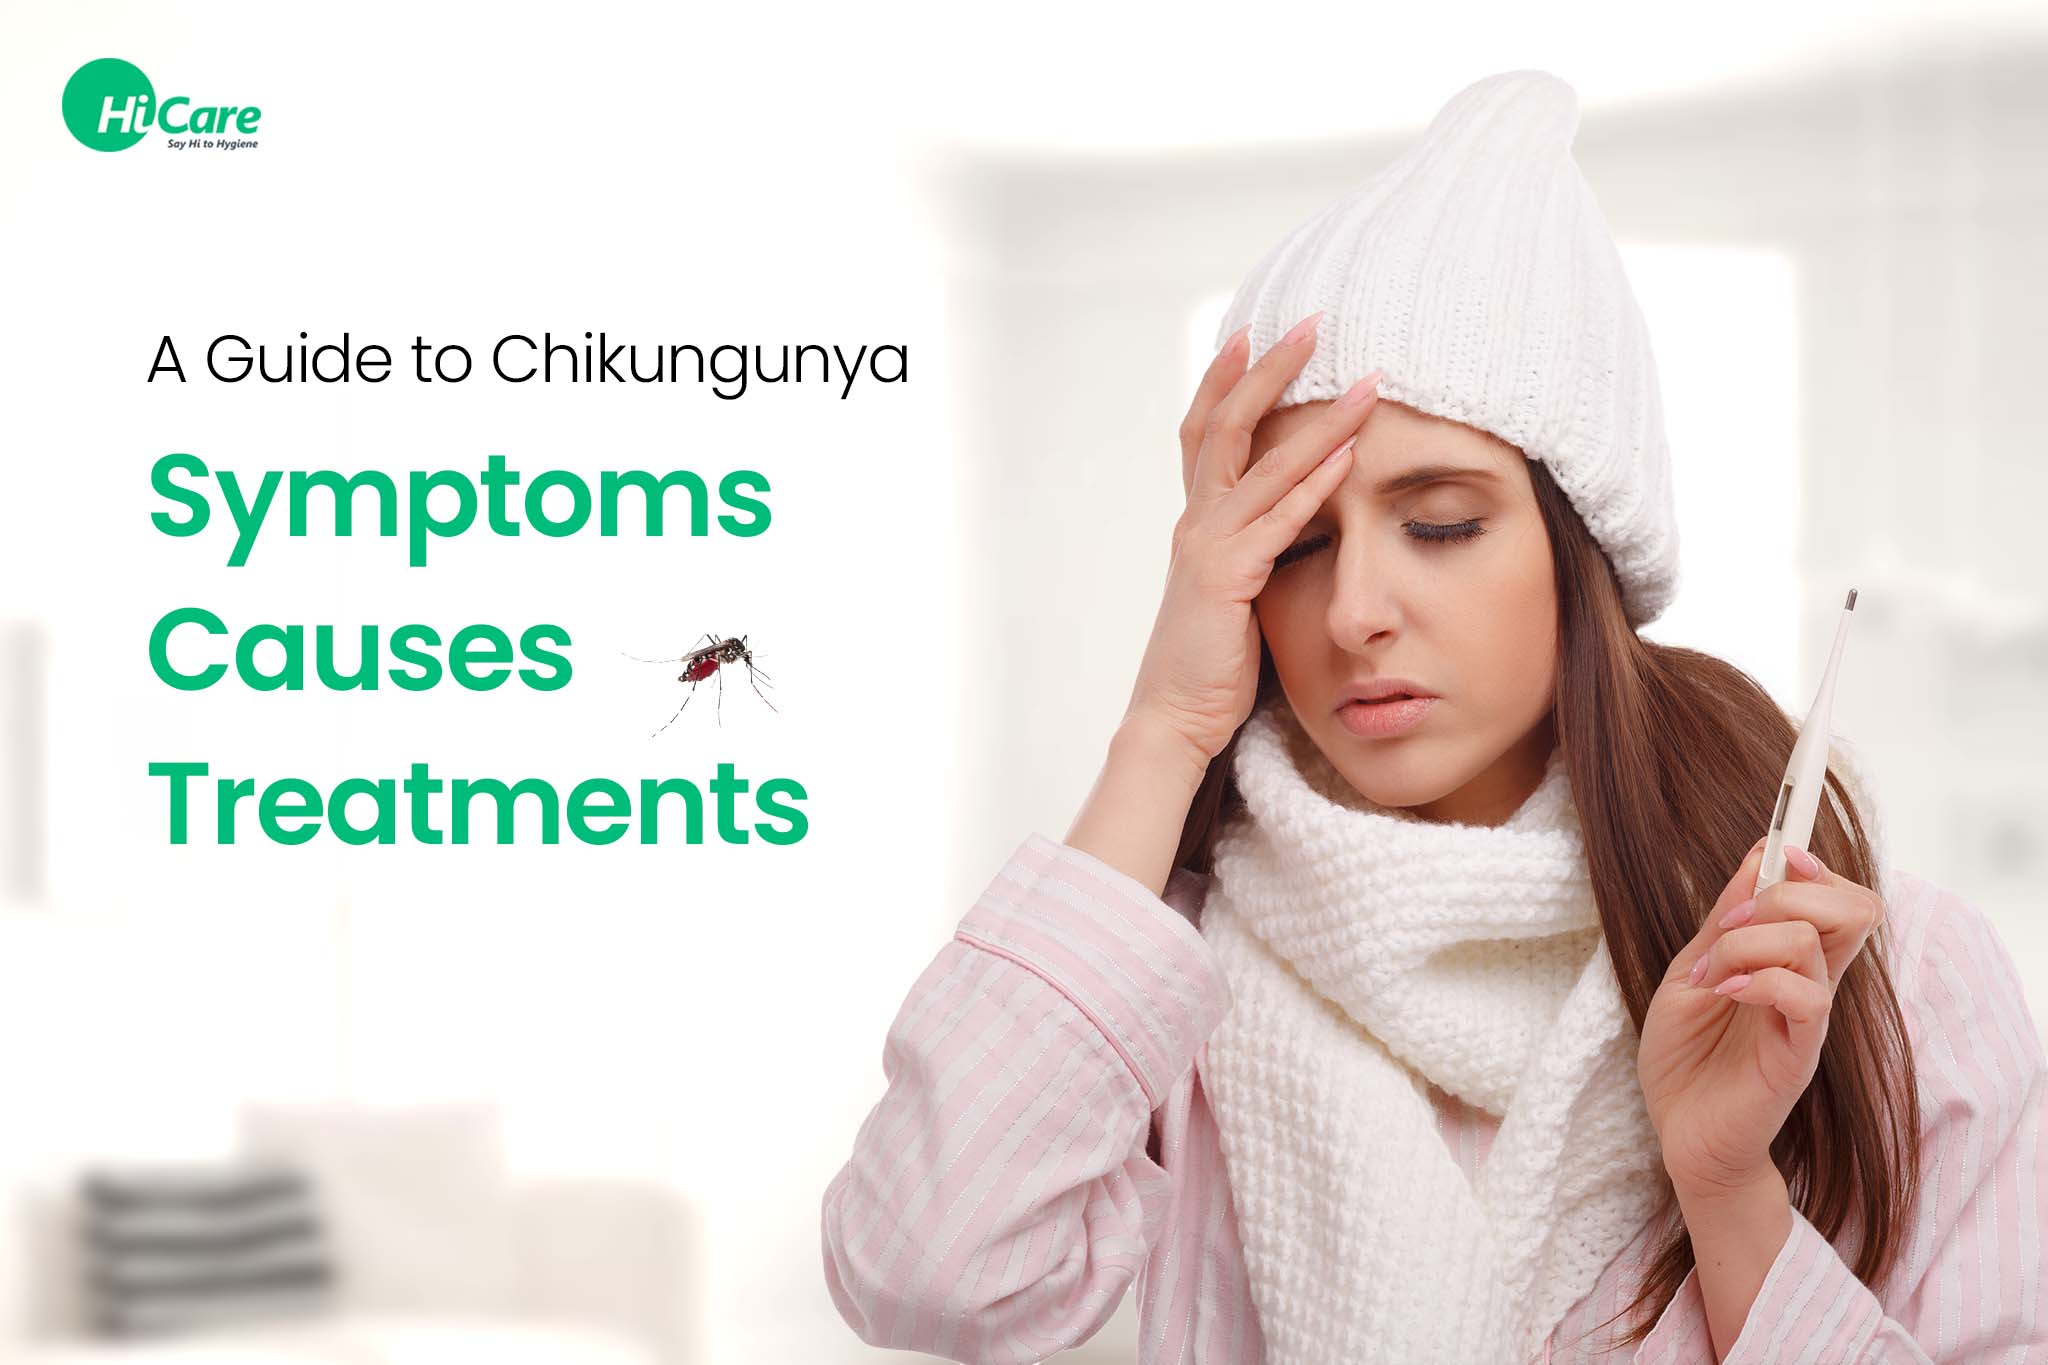 a guide on symptoms, causes and treatments of chikungunya